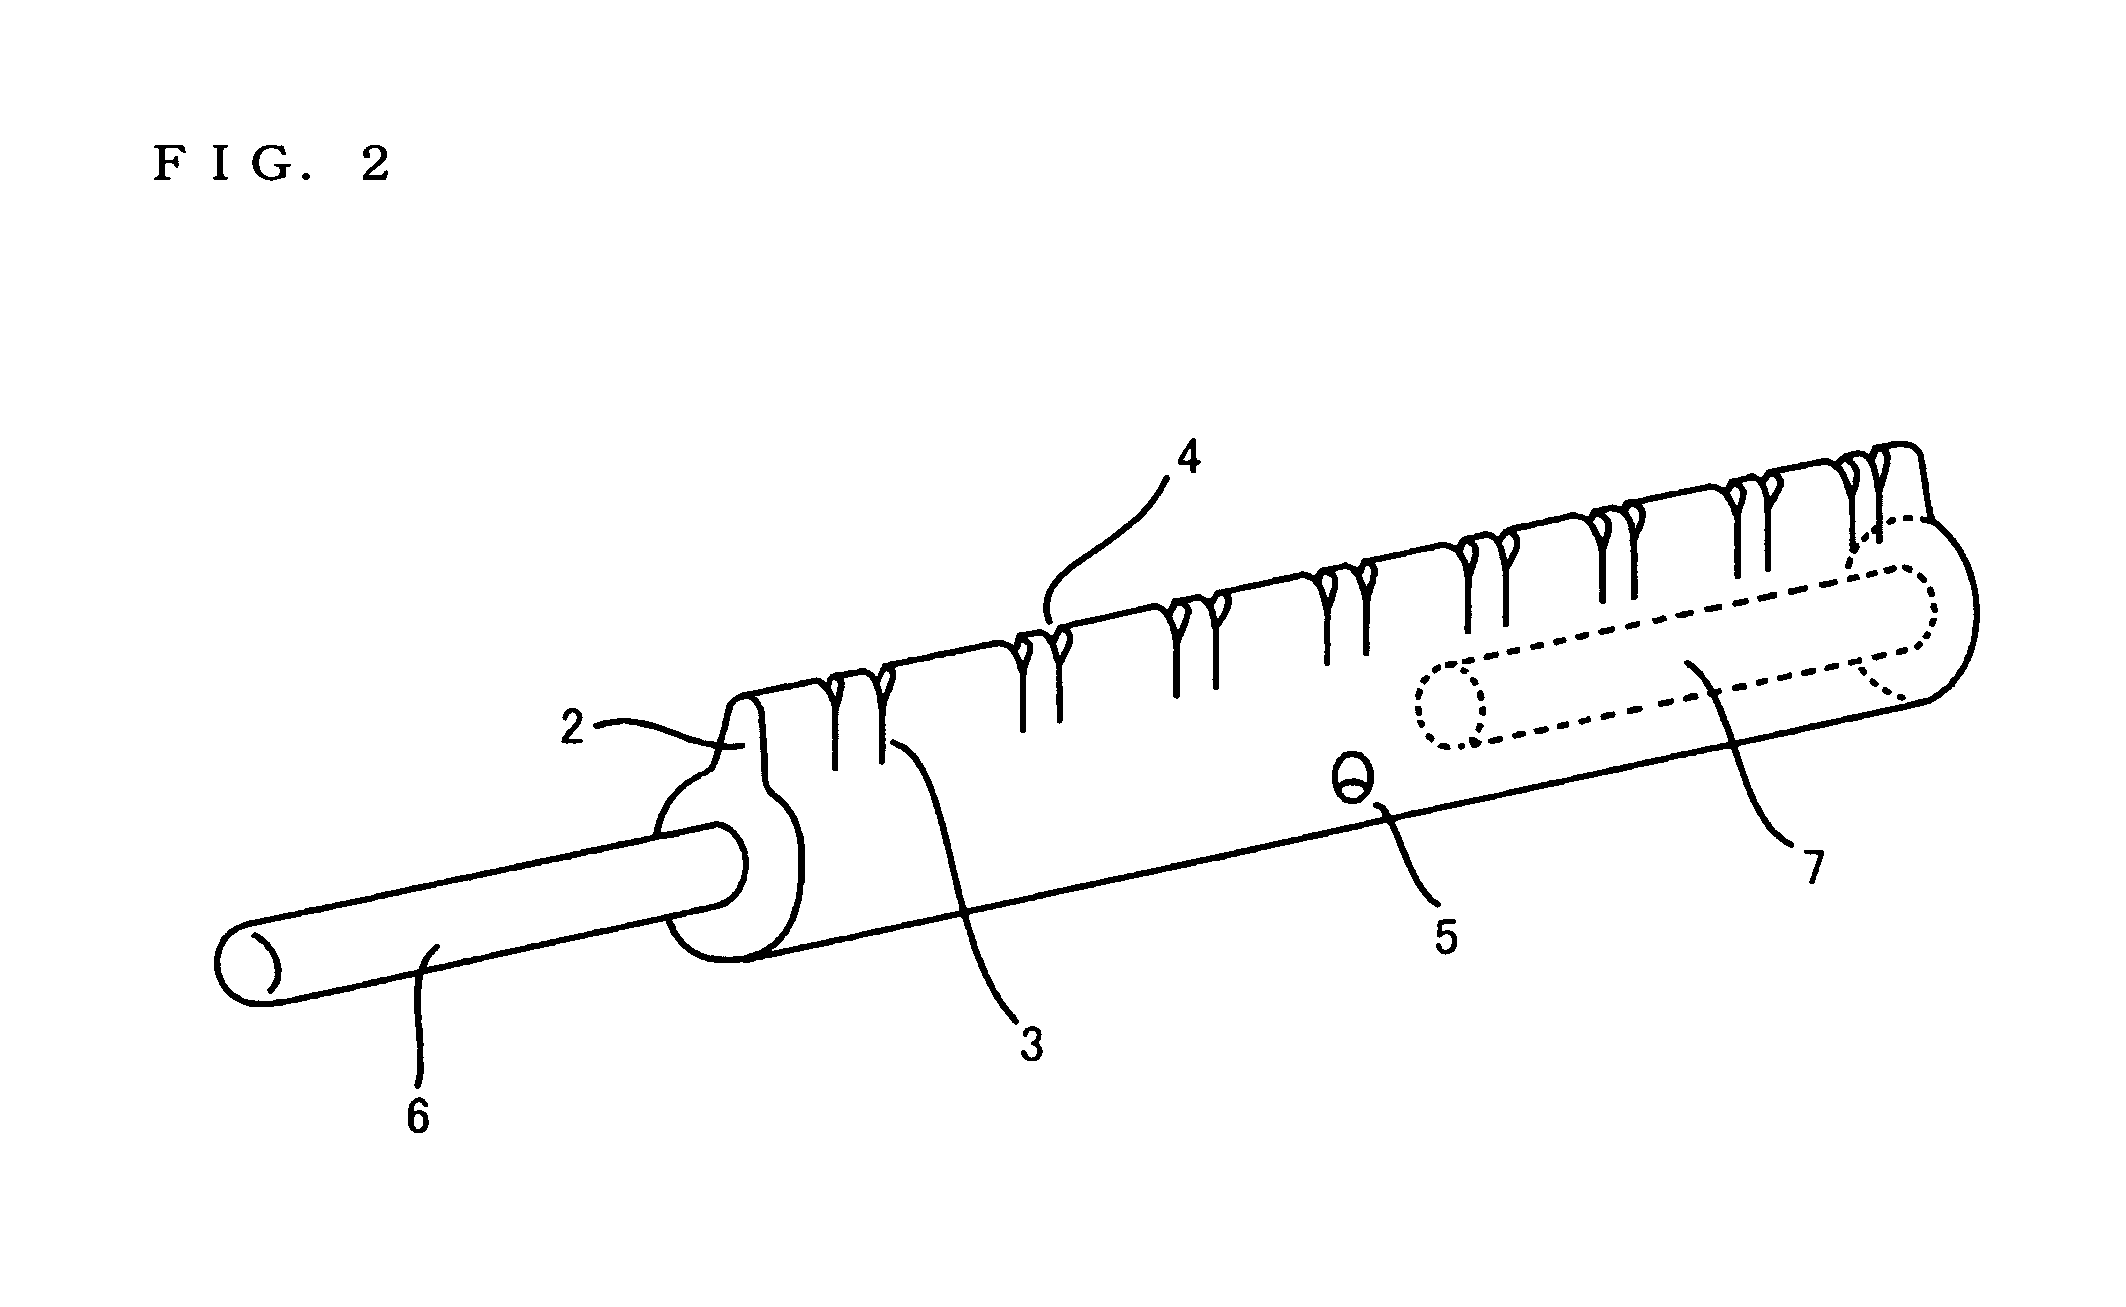 Apparatus for holding and arranging threads in surgical operations